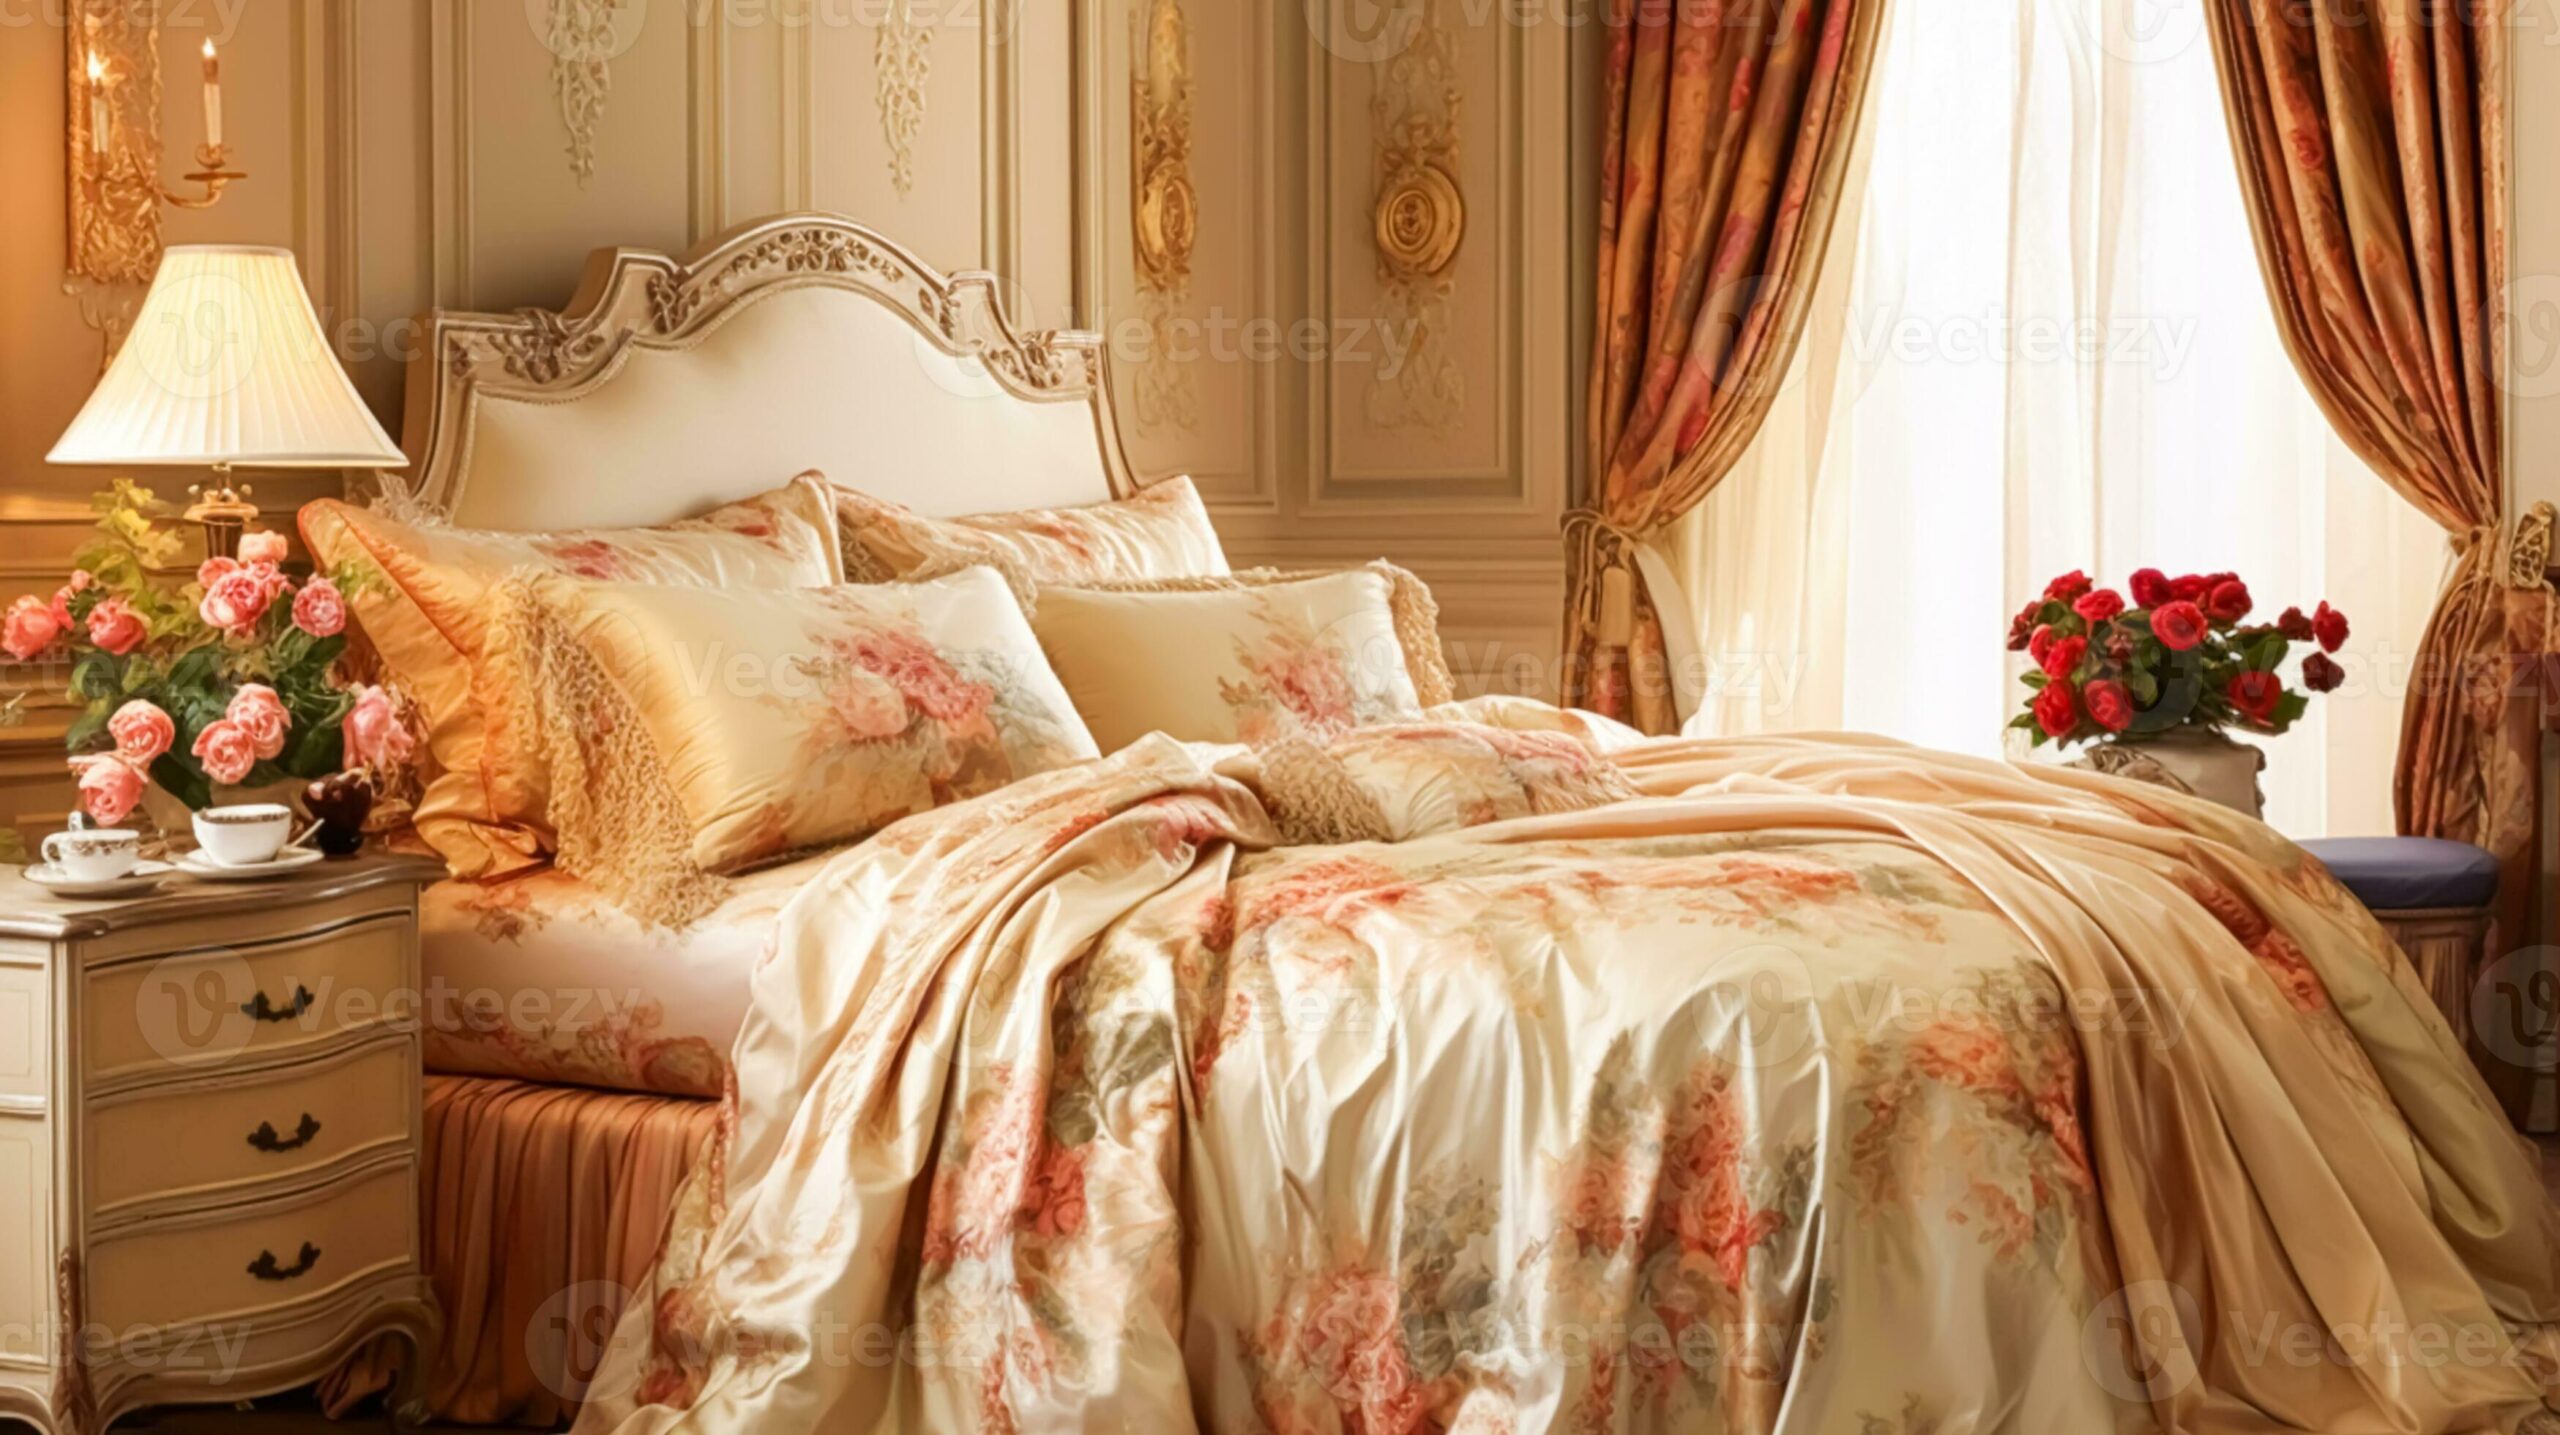 //goldendecor.ae/wp-content/uploads/2024/01/bedroom-decor-interior-design-and-autumnal-home-decor-bed-with-silk-satin-bedding-bespoke-furniture-and-autumn-decoration-english-country-house-holiday-rental-and-cottage-style-photo-scaled.jpg